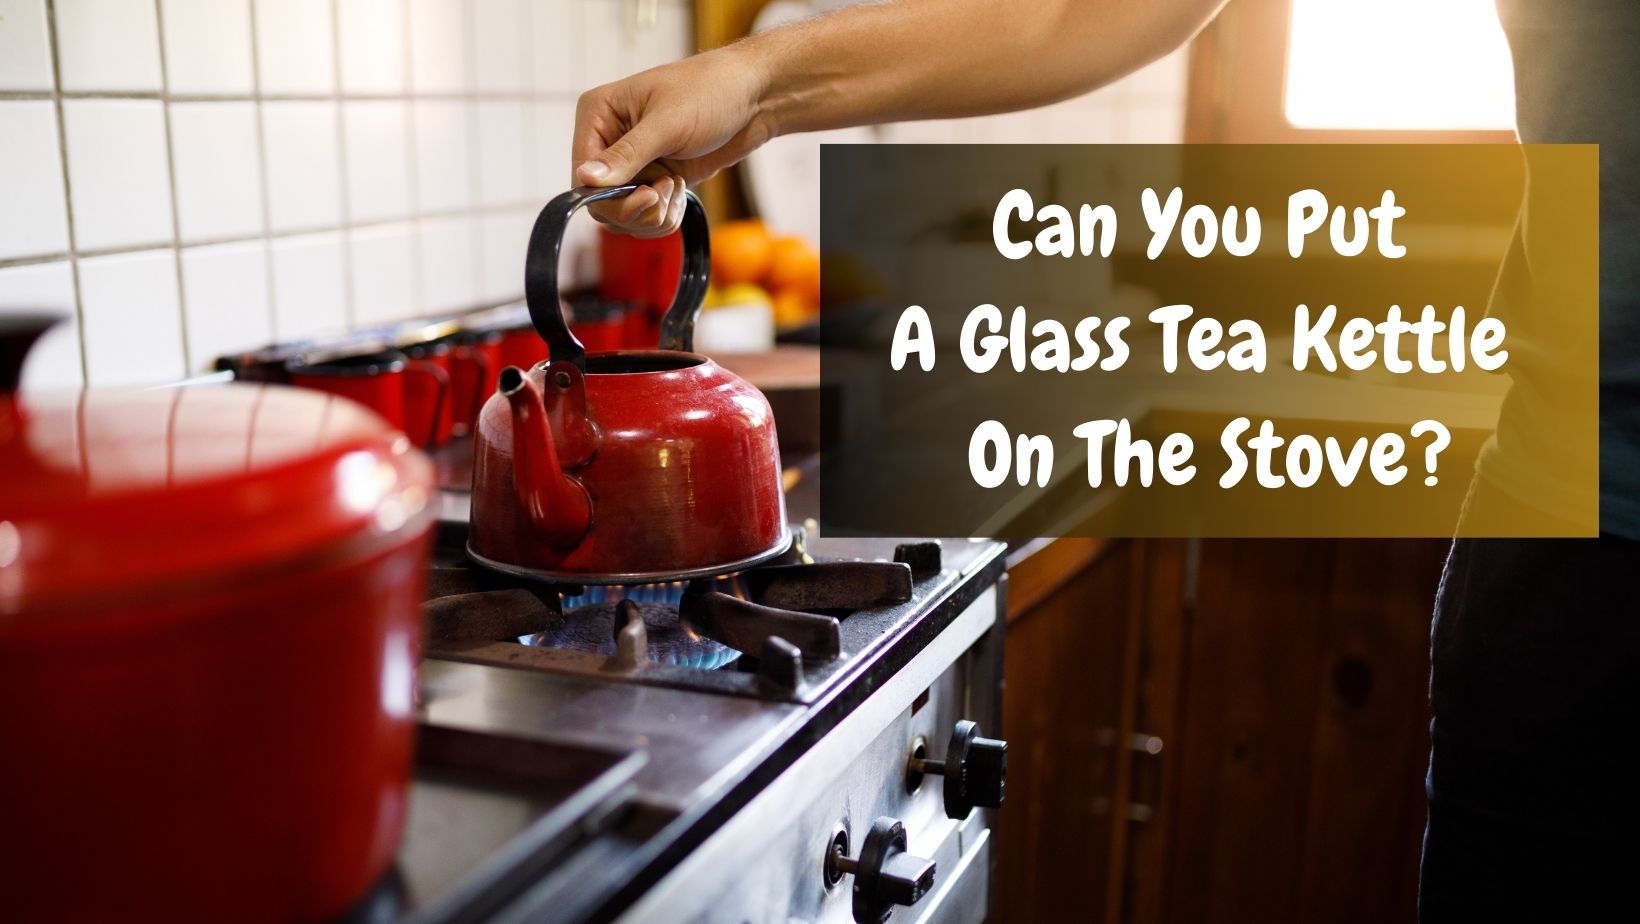 Can You Put A Glass Tea Kettle On The Stove